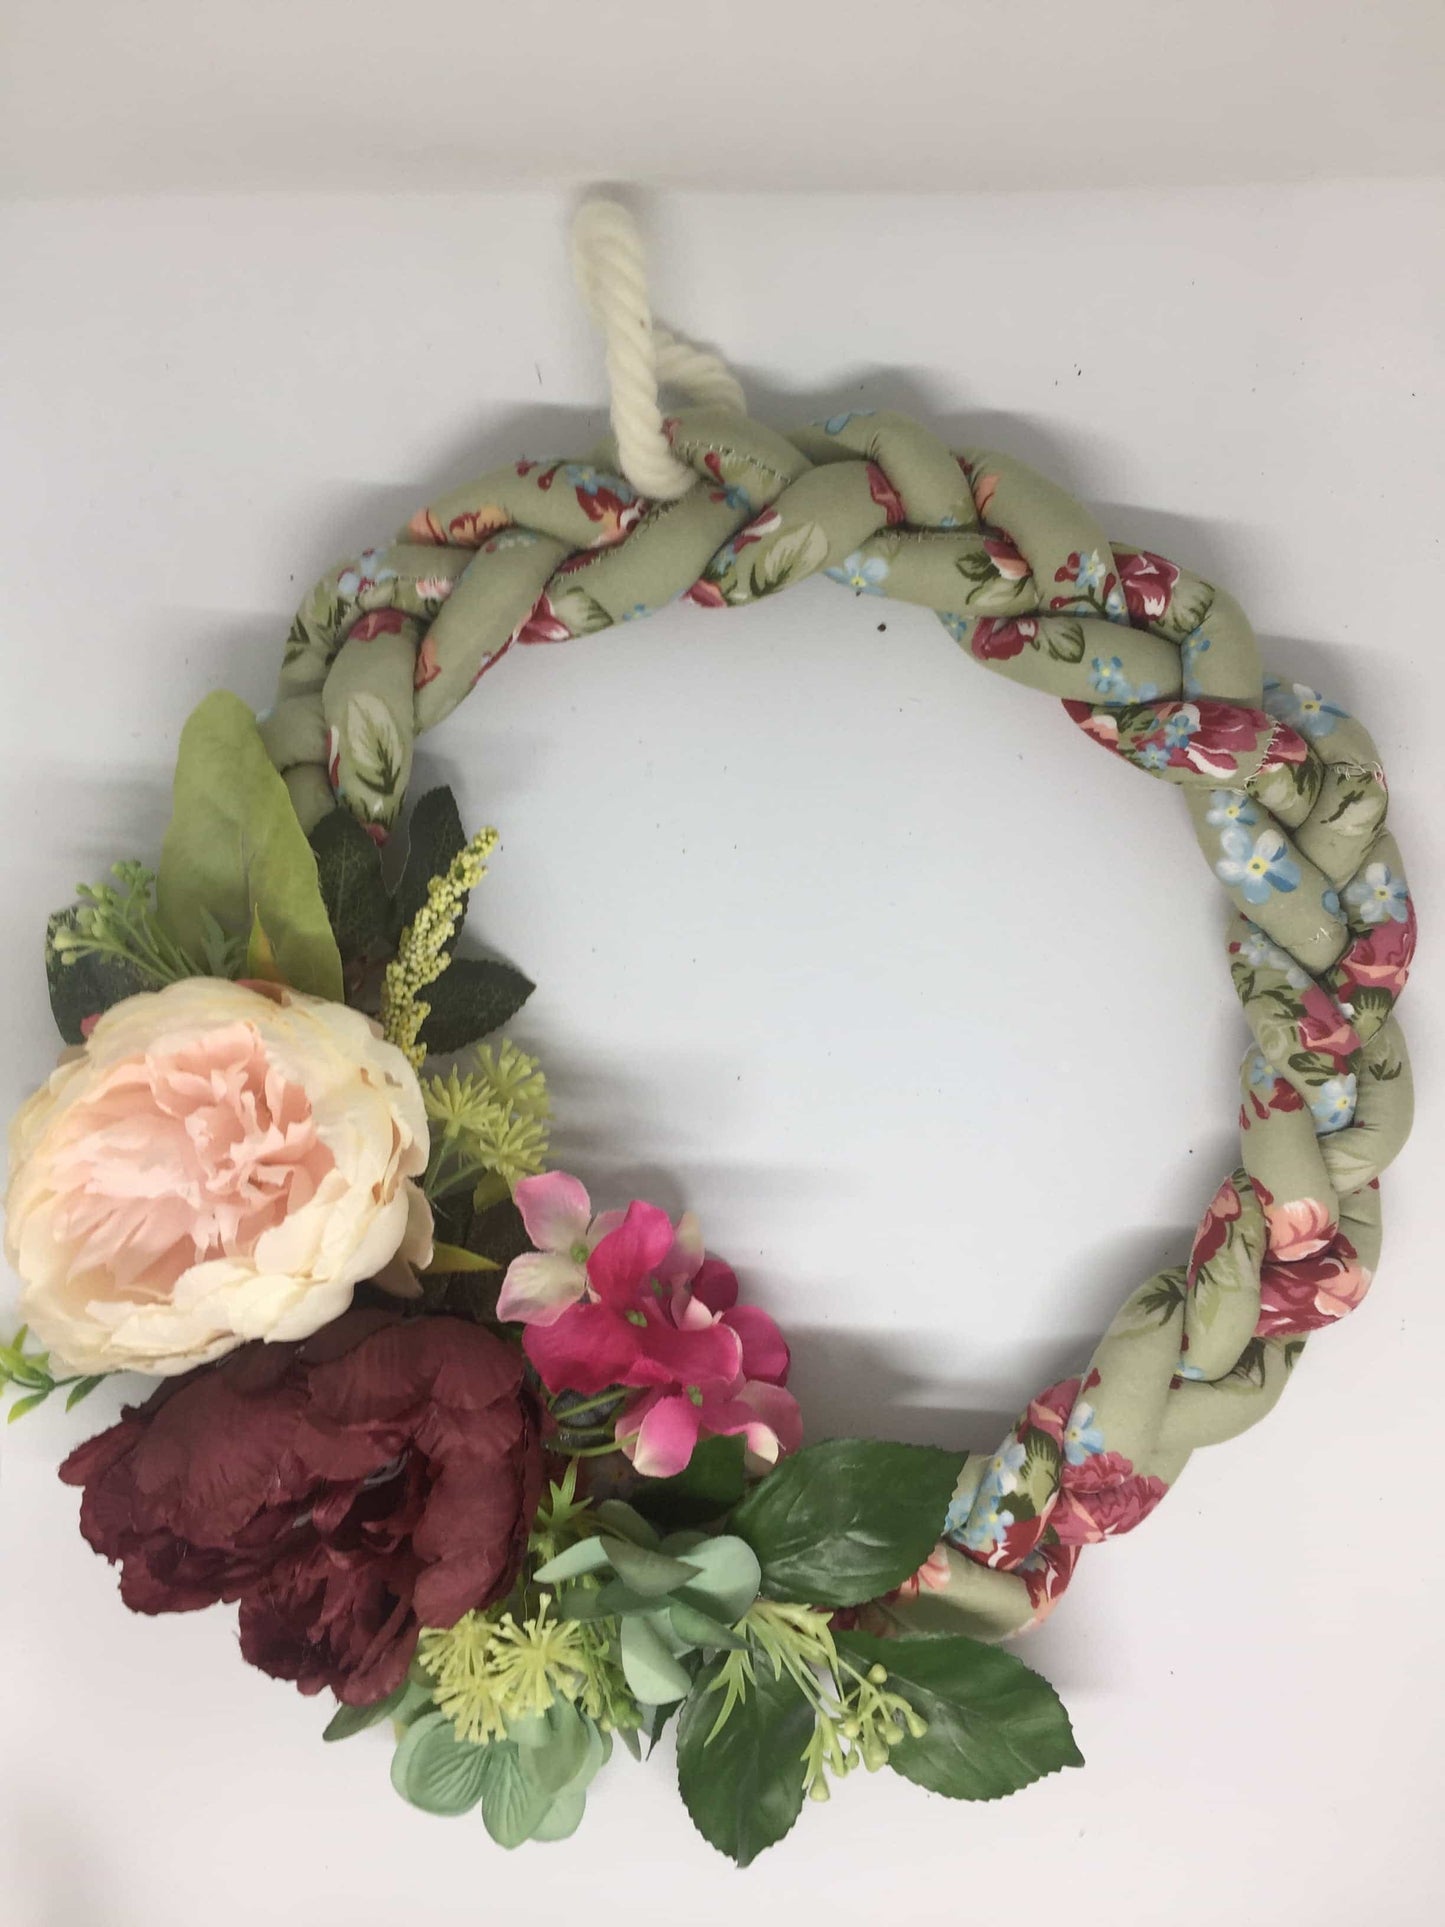 Handmade Braided Floral Fabric Wreath-All-Times-Gifts